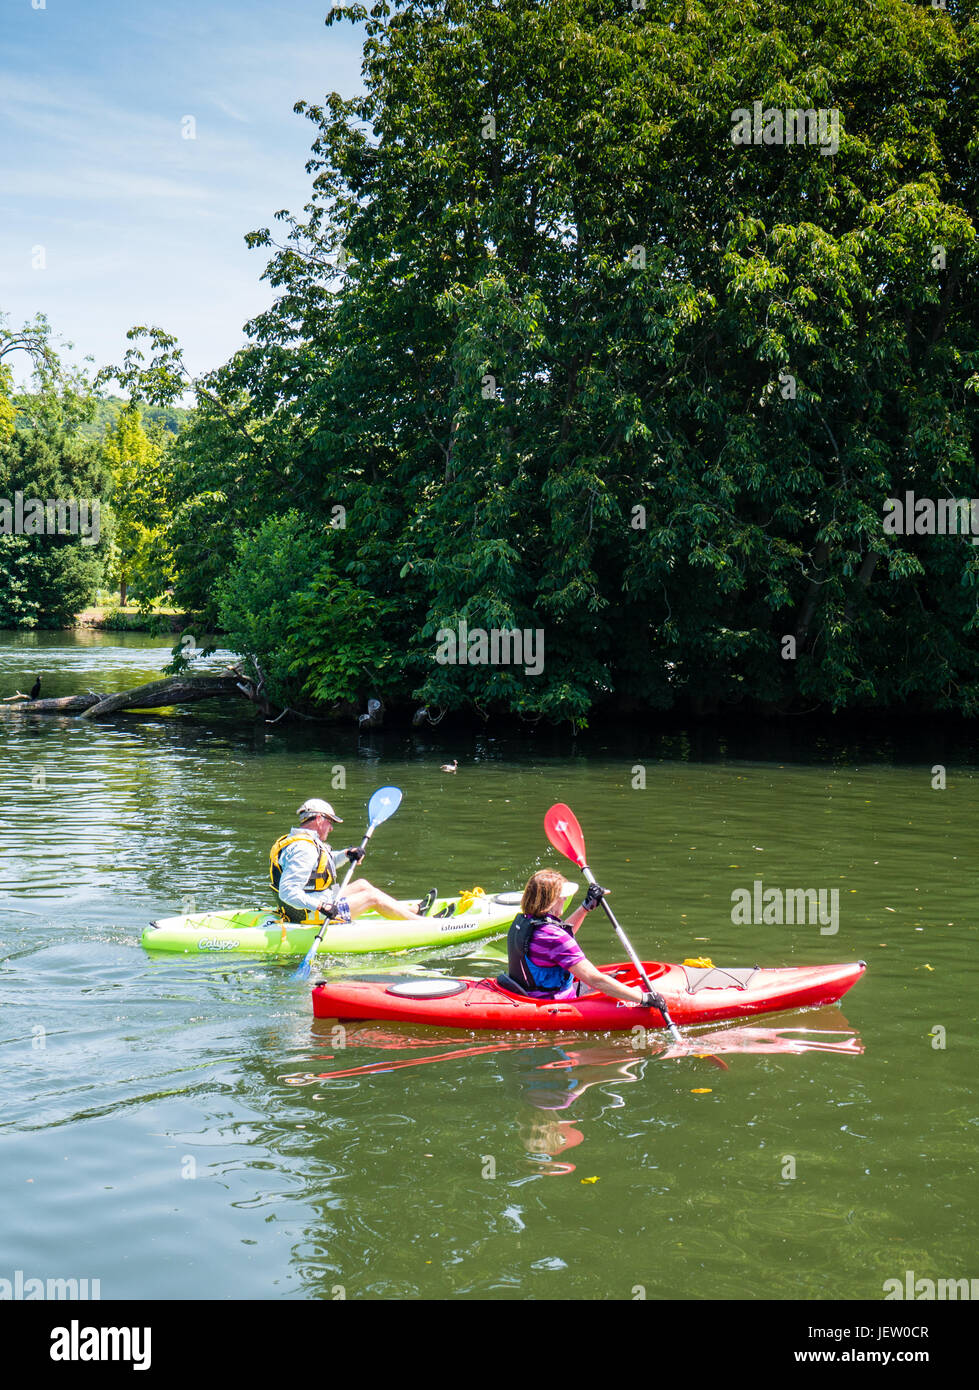 Paar Kanusport, Themse, Henley-on-Thames, Oxfordshire, England, GB, GB. Stockfoto